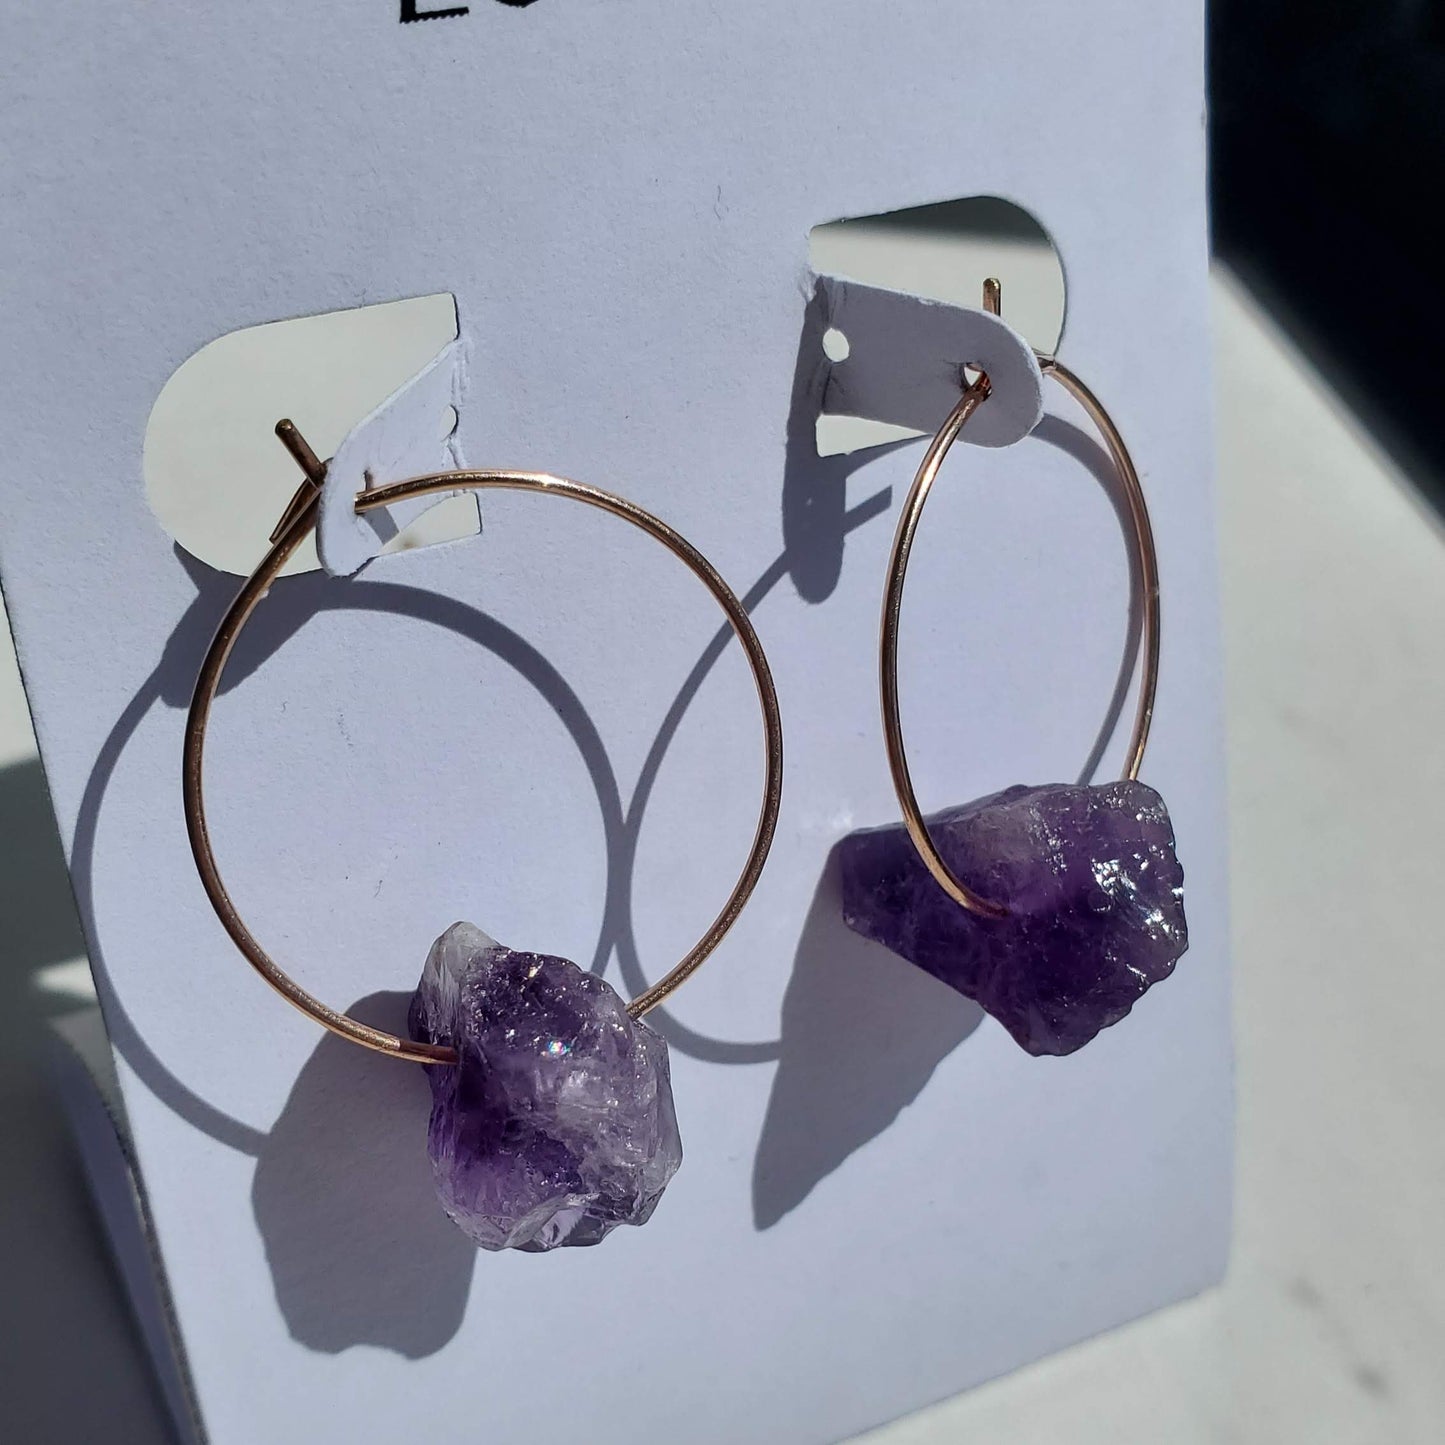 Limited Edition | Amethyst Rose Gold Filled Hoops